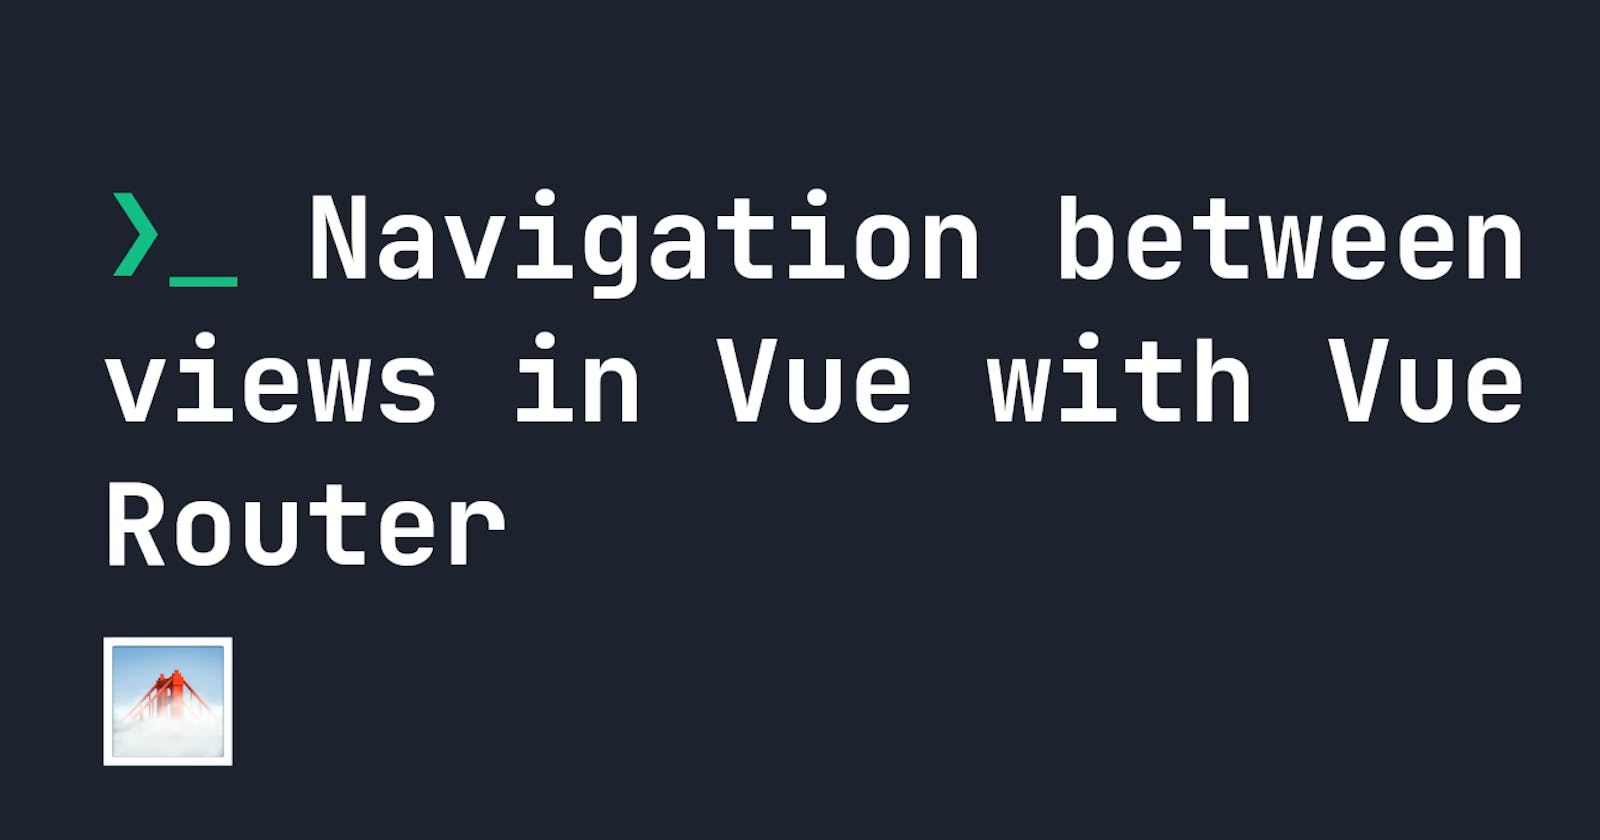 Navigation between views in Vue with Vue Router